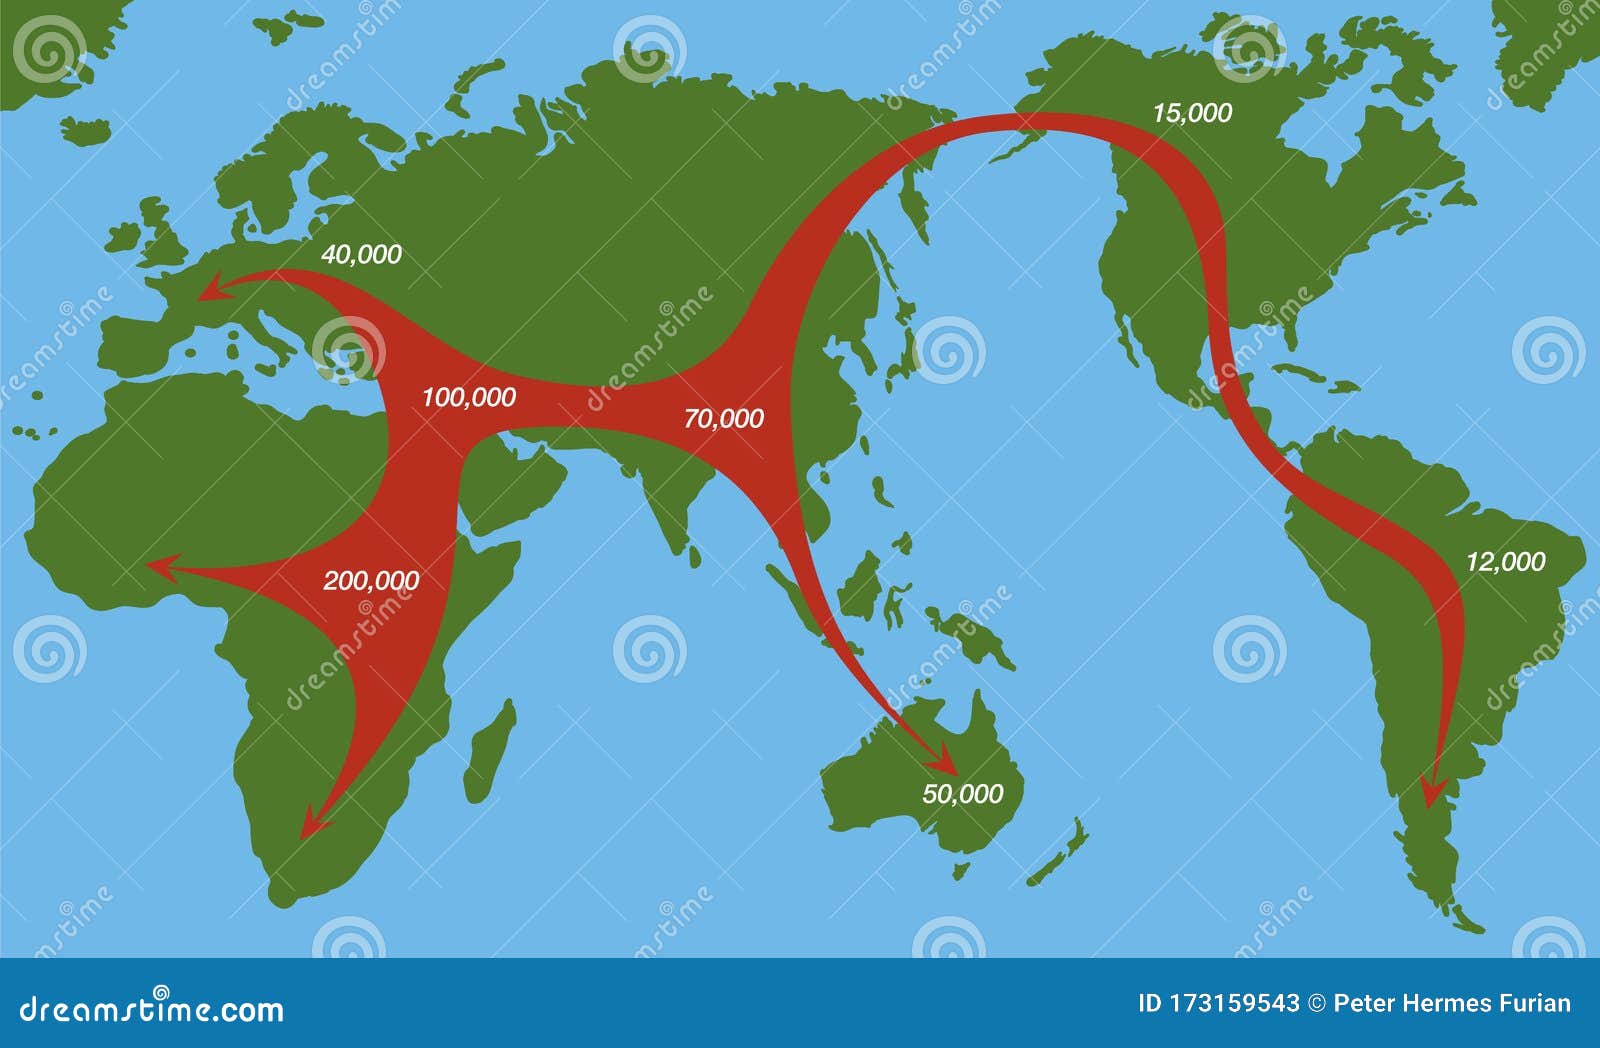 human migration paths world geographical area early ages